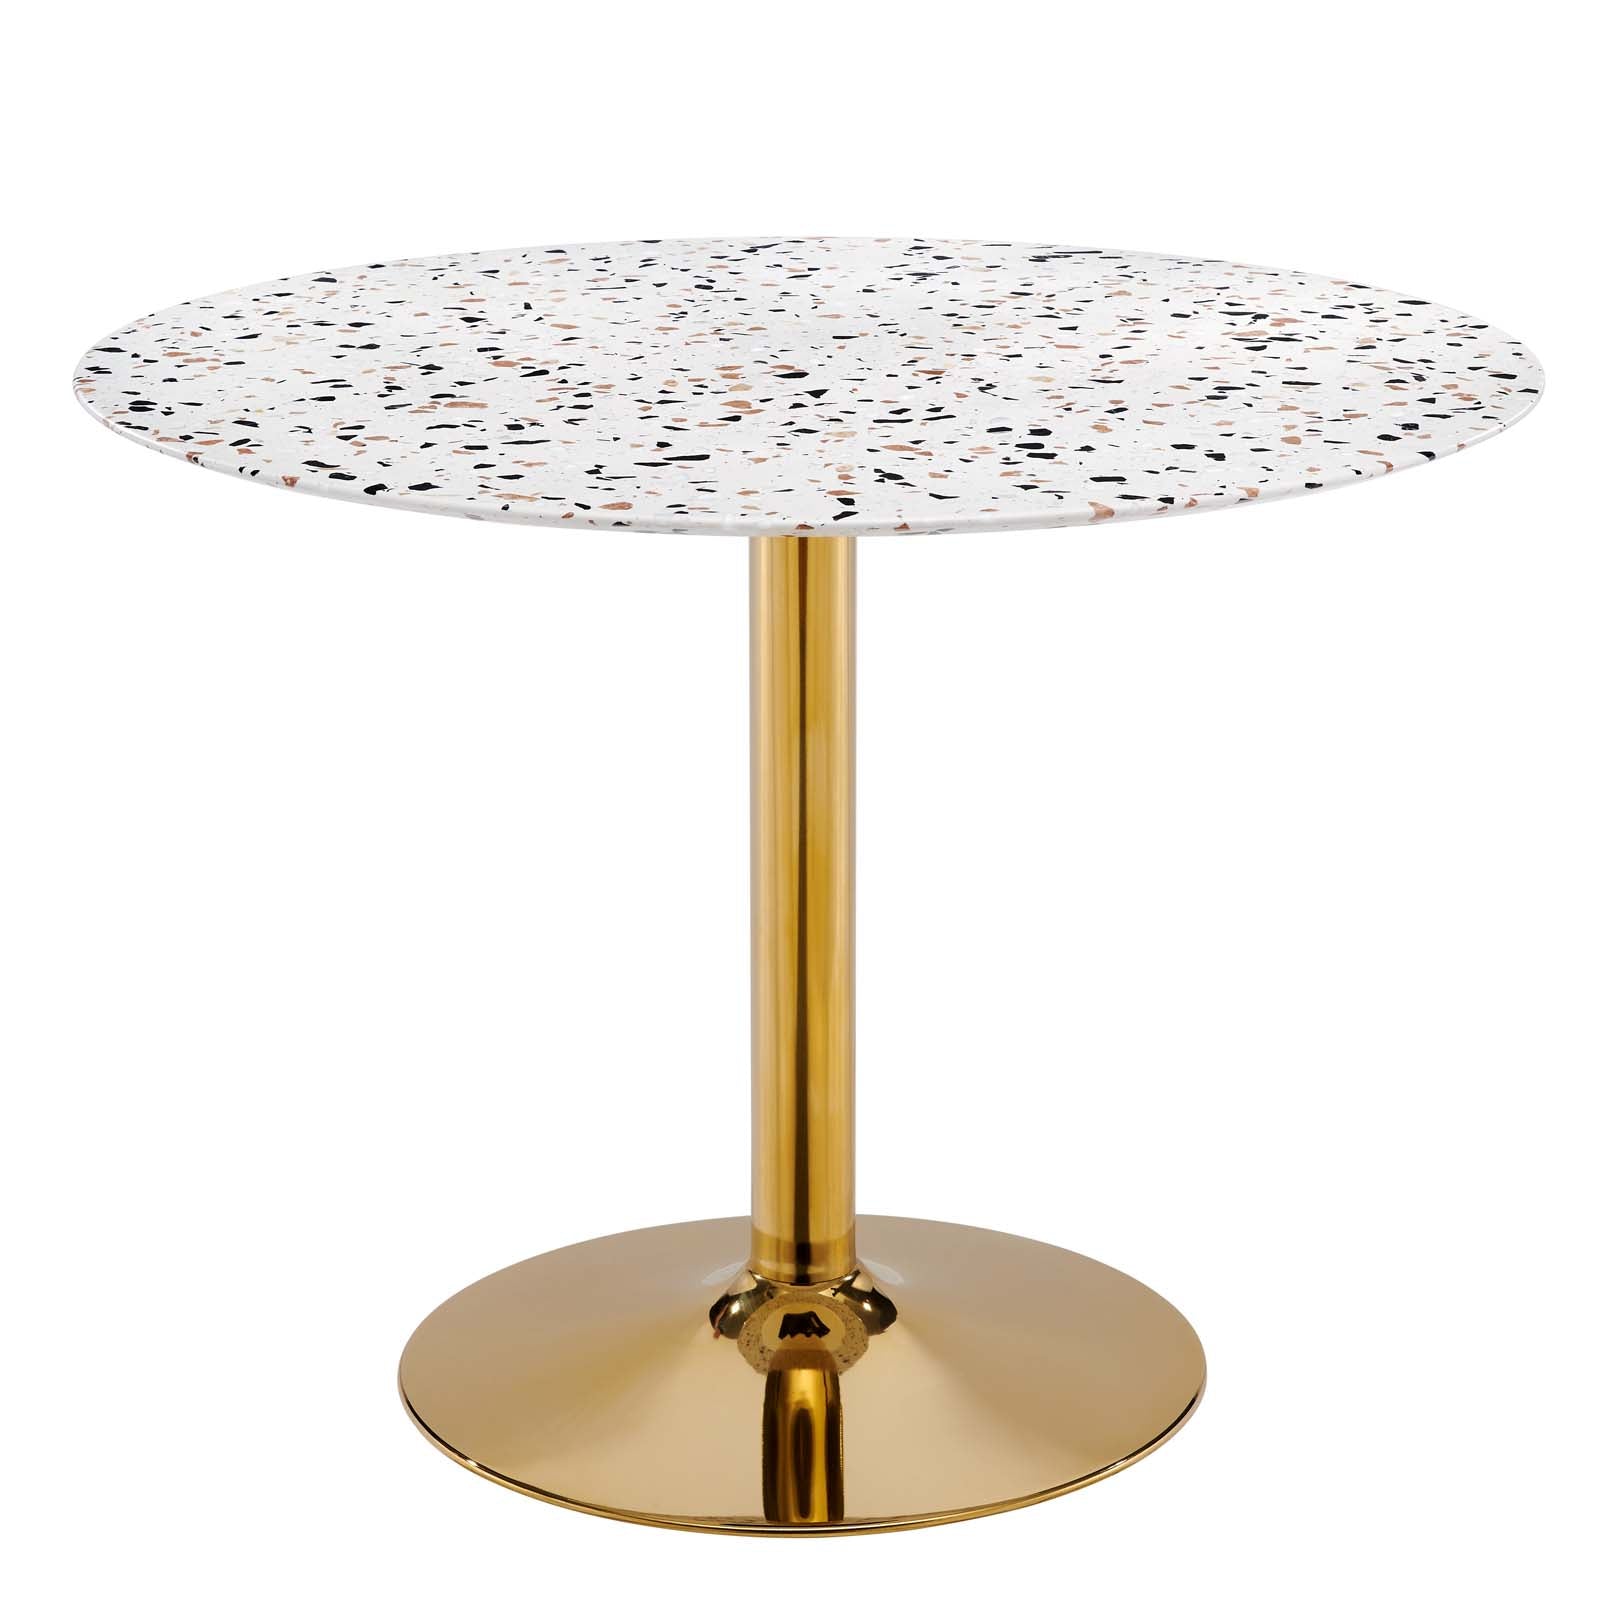 Verne 40" Round Terrazzo Dining Table - East Shore Modern Home Furnishings